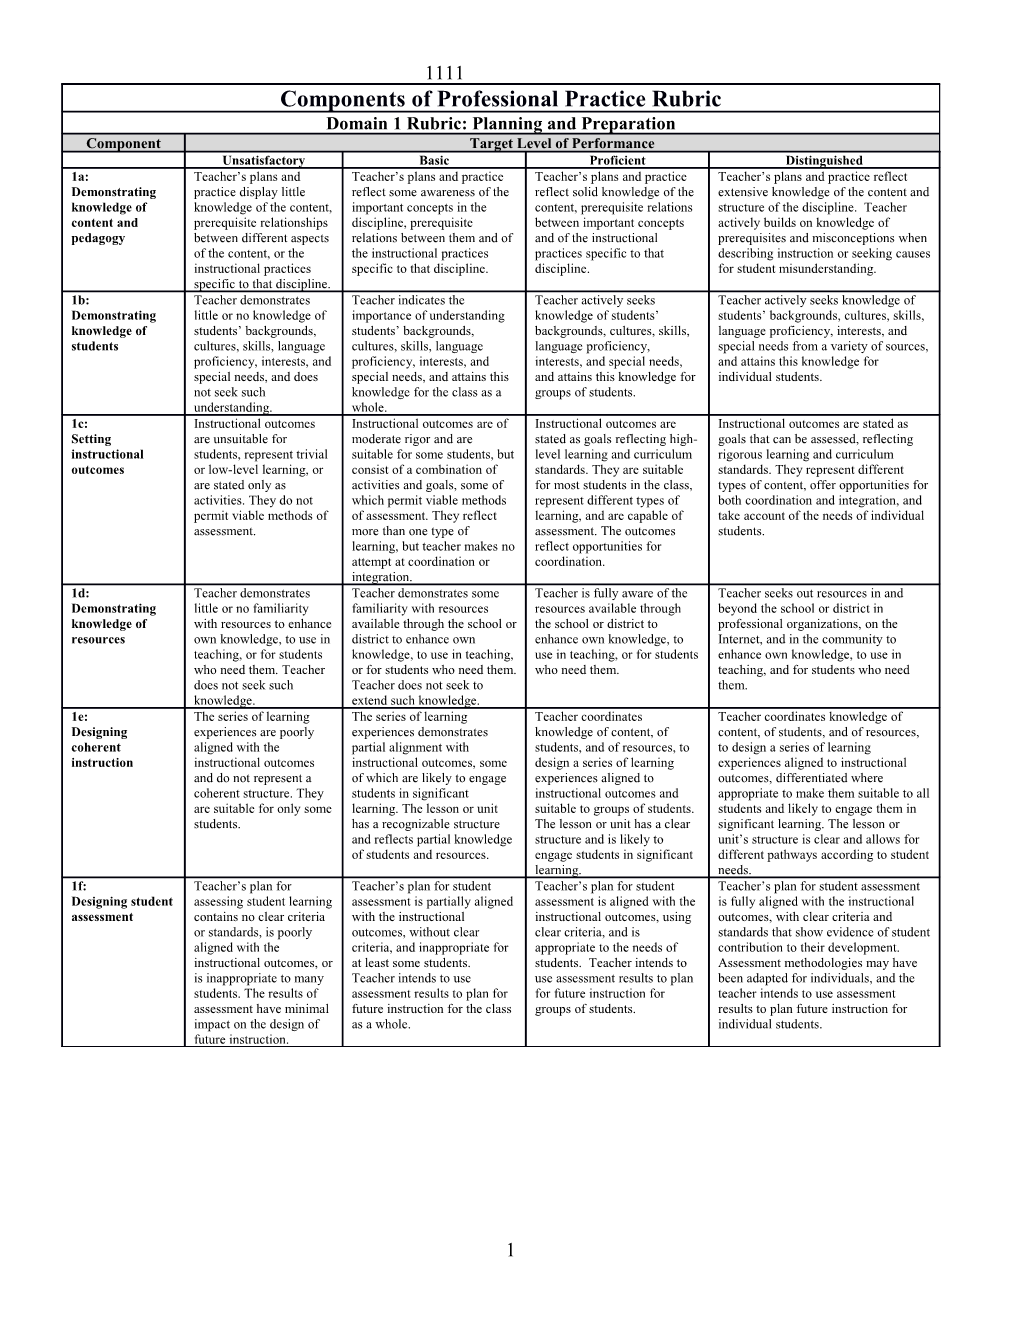 Components of Professional Practice Rubric